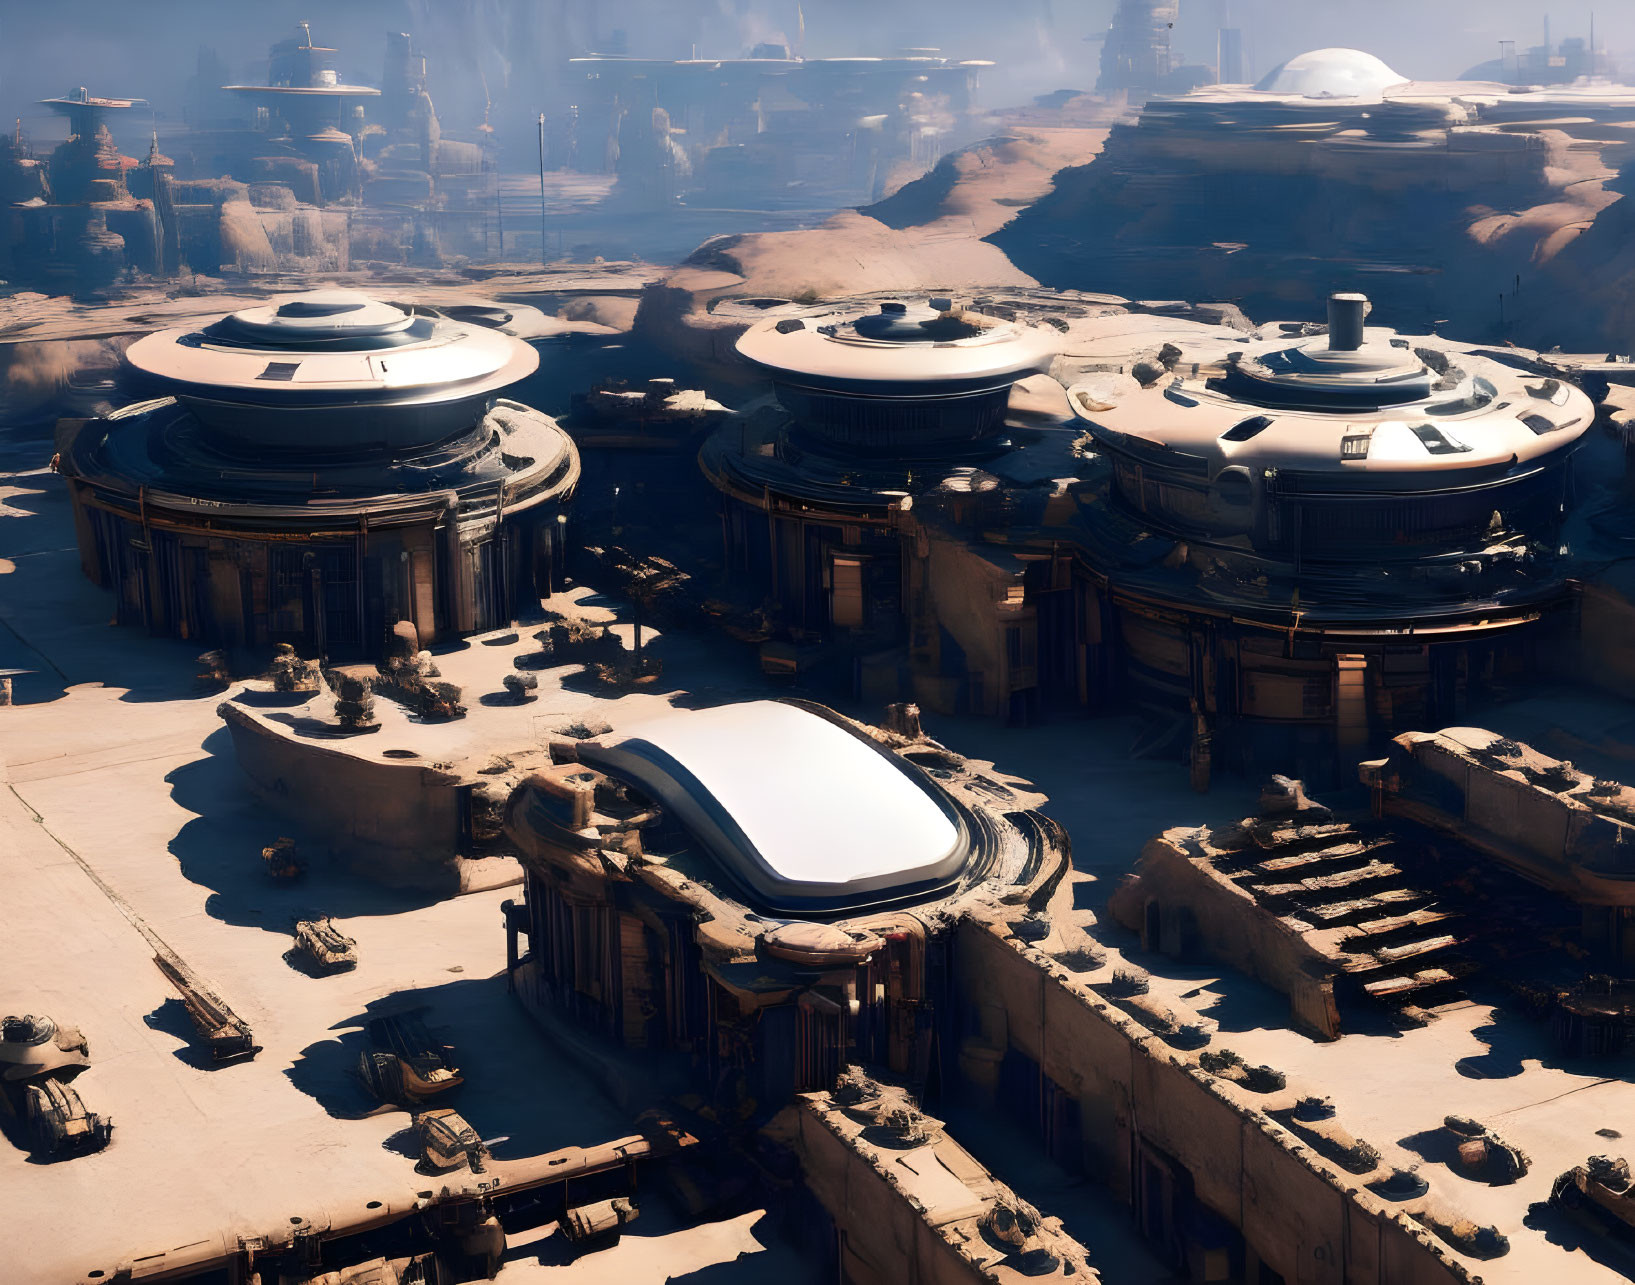 Futuristic desert city with large dome structures and advanced buildings.